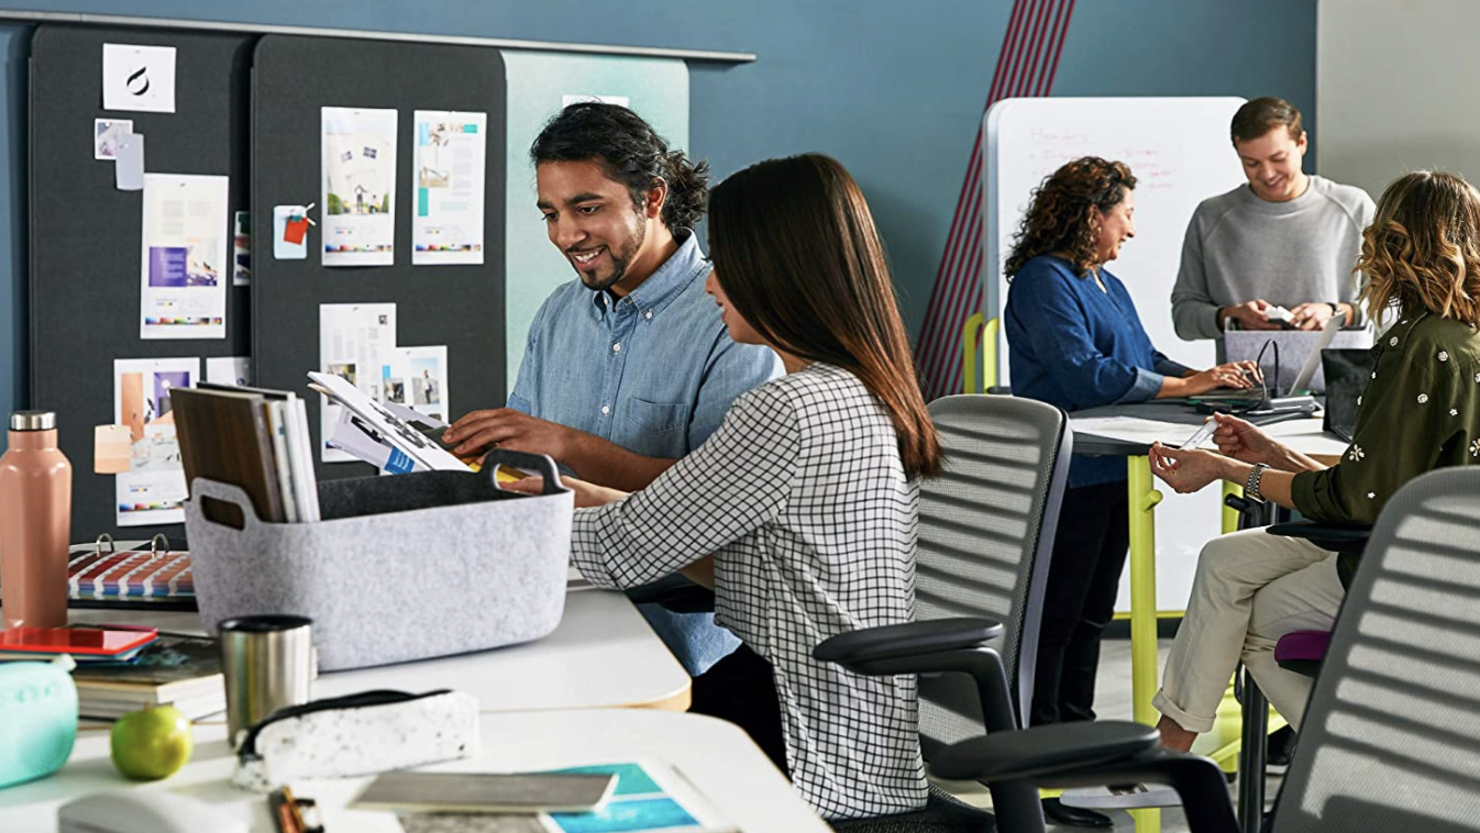 The Steelcase Series 1 Office Chair is 10% off today